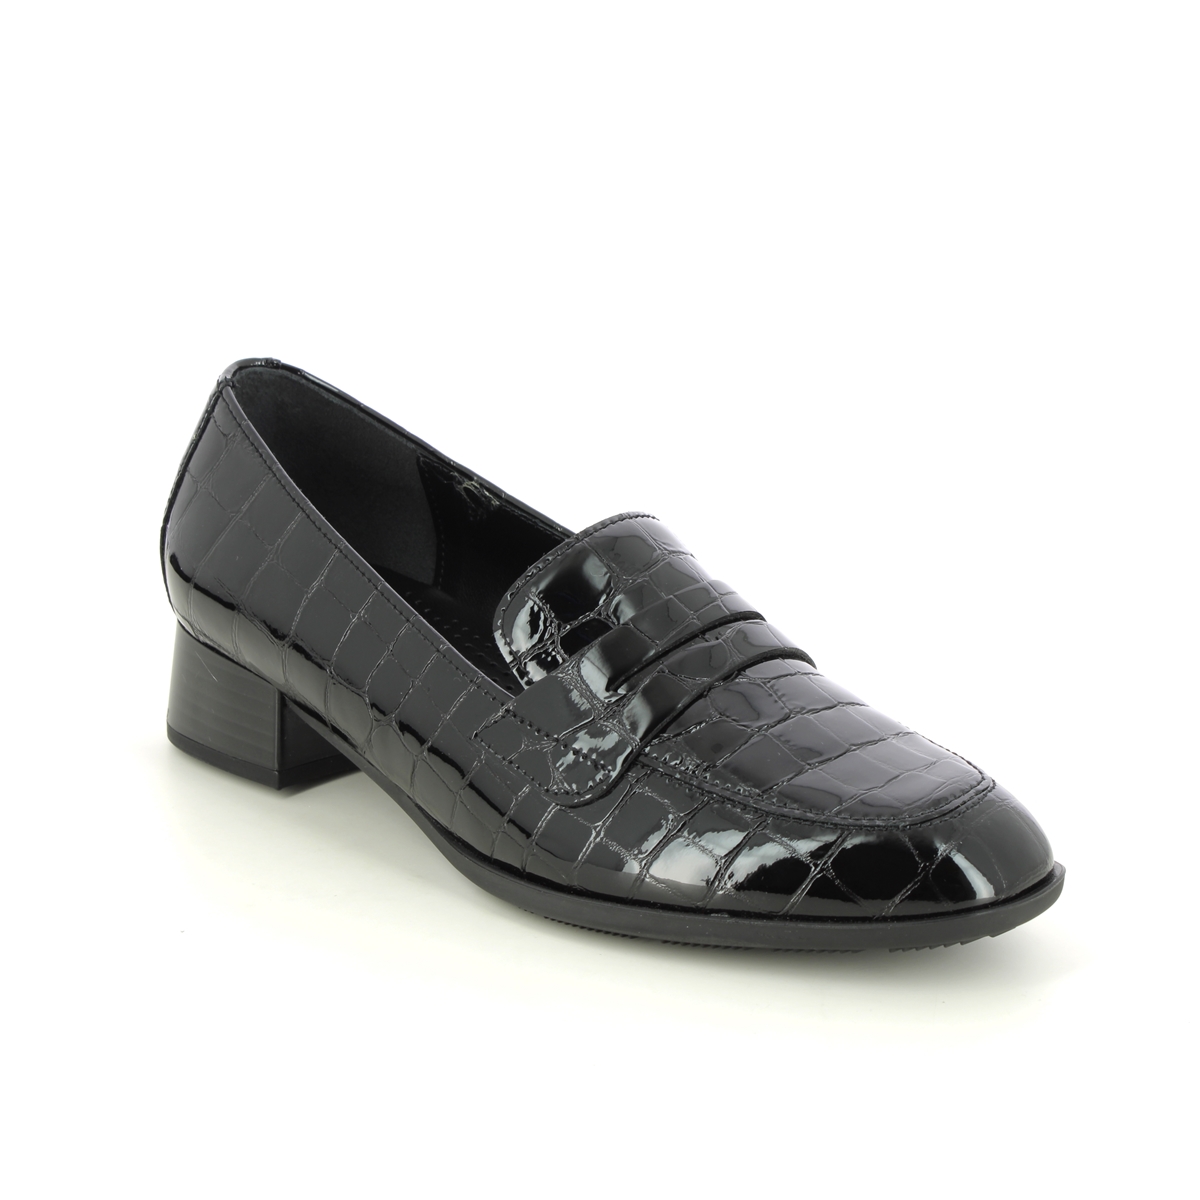 Gabor Right Penny Black Croc Womens Loafers 35.280.97 In Size 4 In Plain Black Croc Effect  Womens Loafers In Soft Black Croc Effect Leather